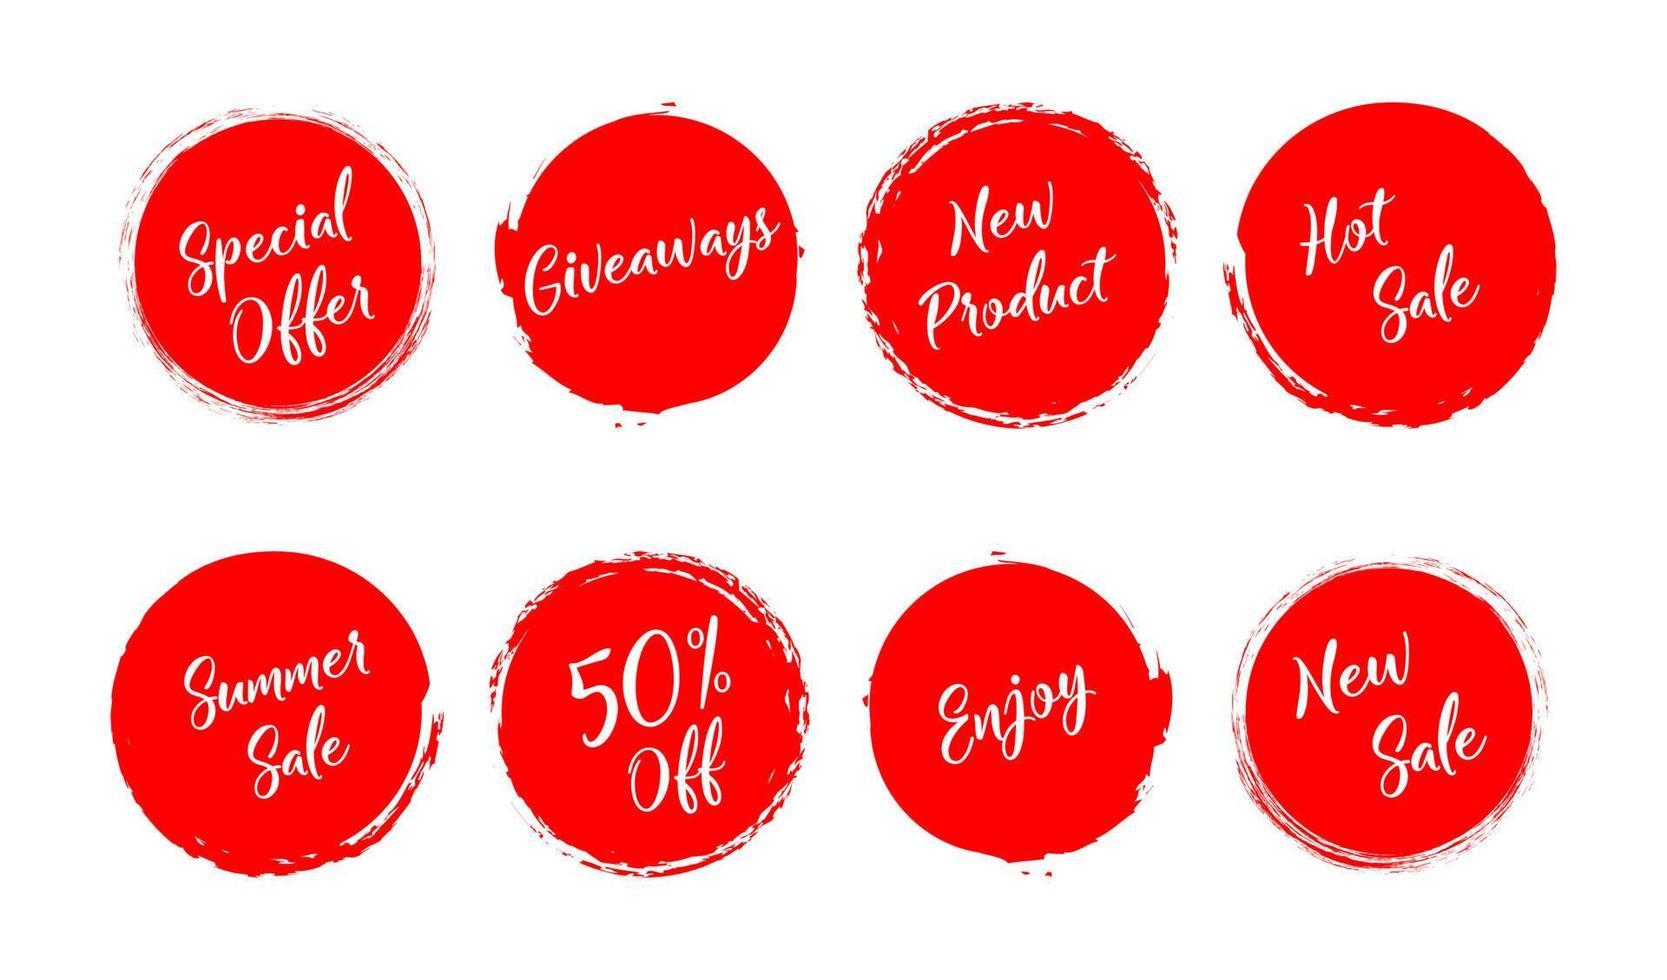 Sale. Summer sale. Giveaway. Special offer. New sale. Grunge style red colored on white background. Eps10 vector